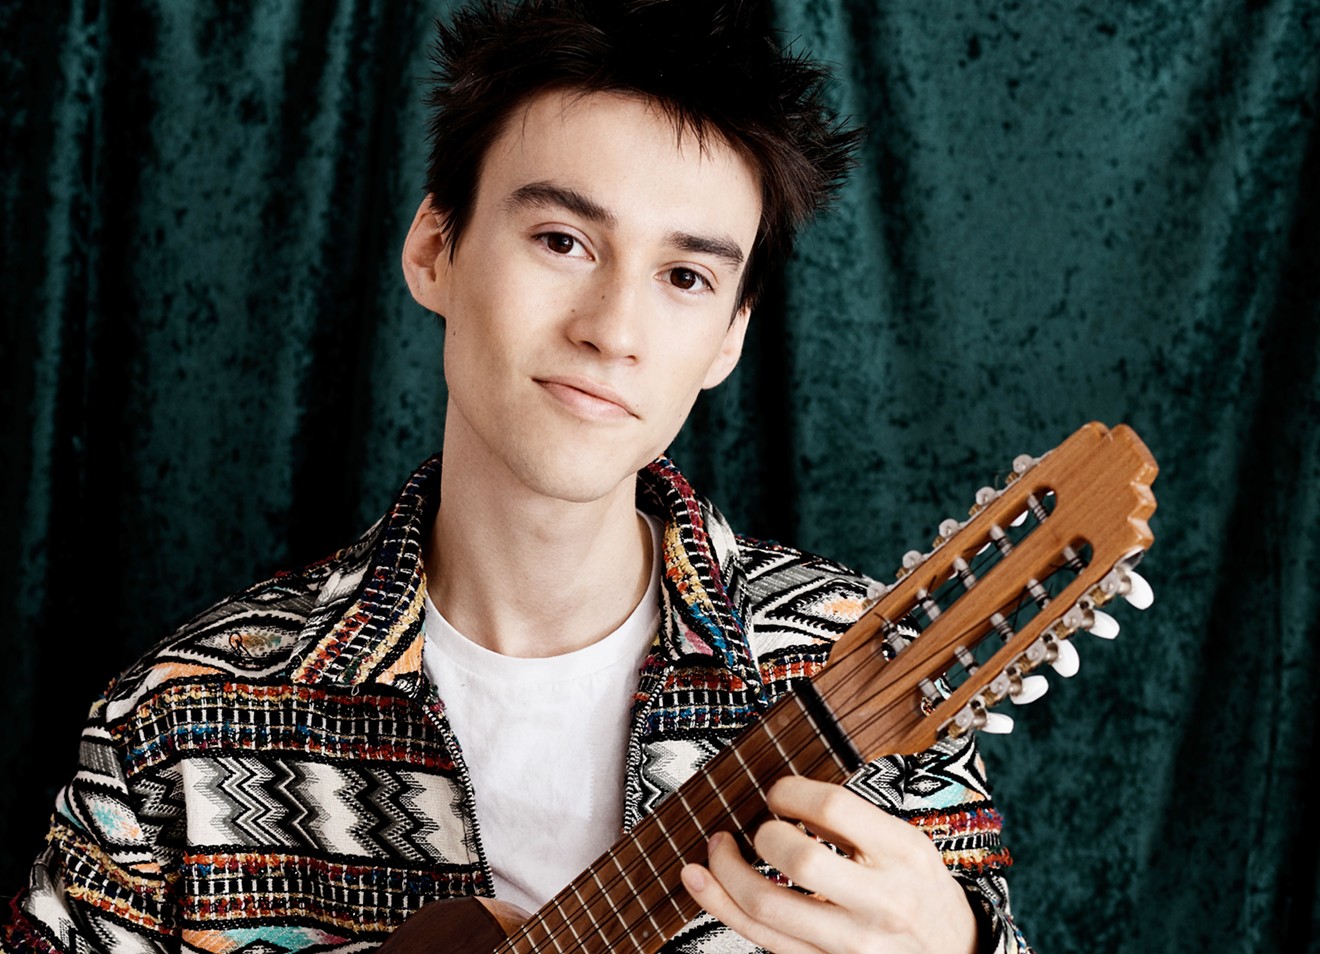 Jacob Collier is scheduled to perform on Wednesday, March 13, at The Van Buren.